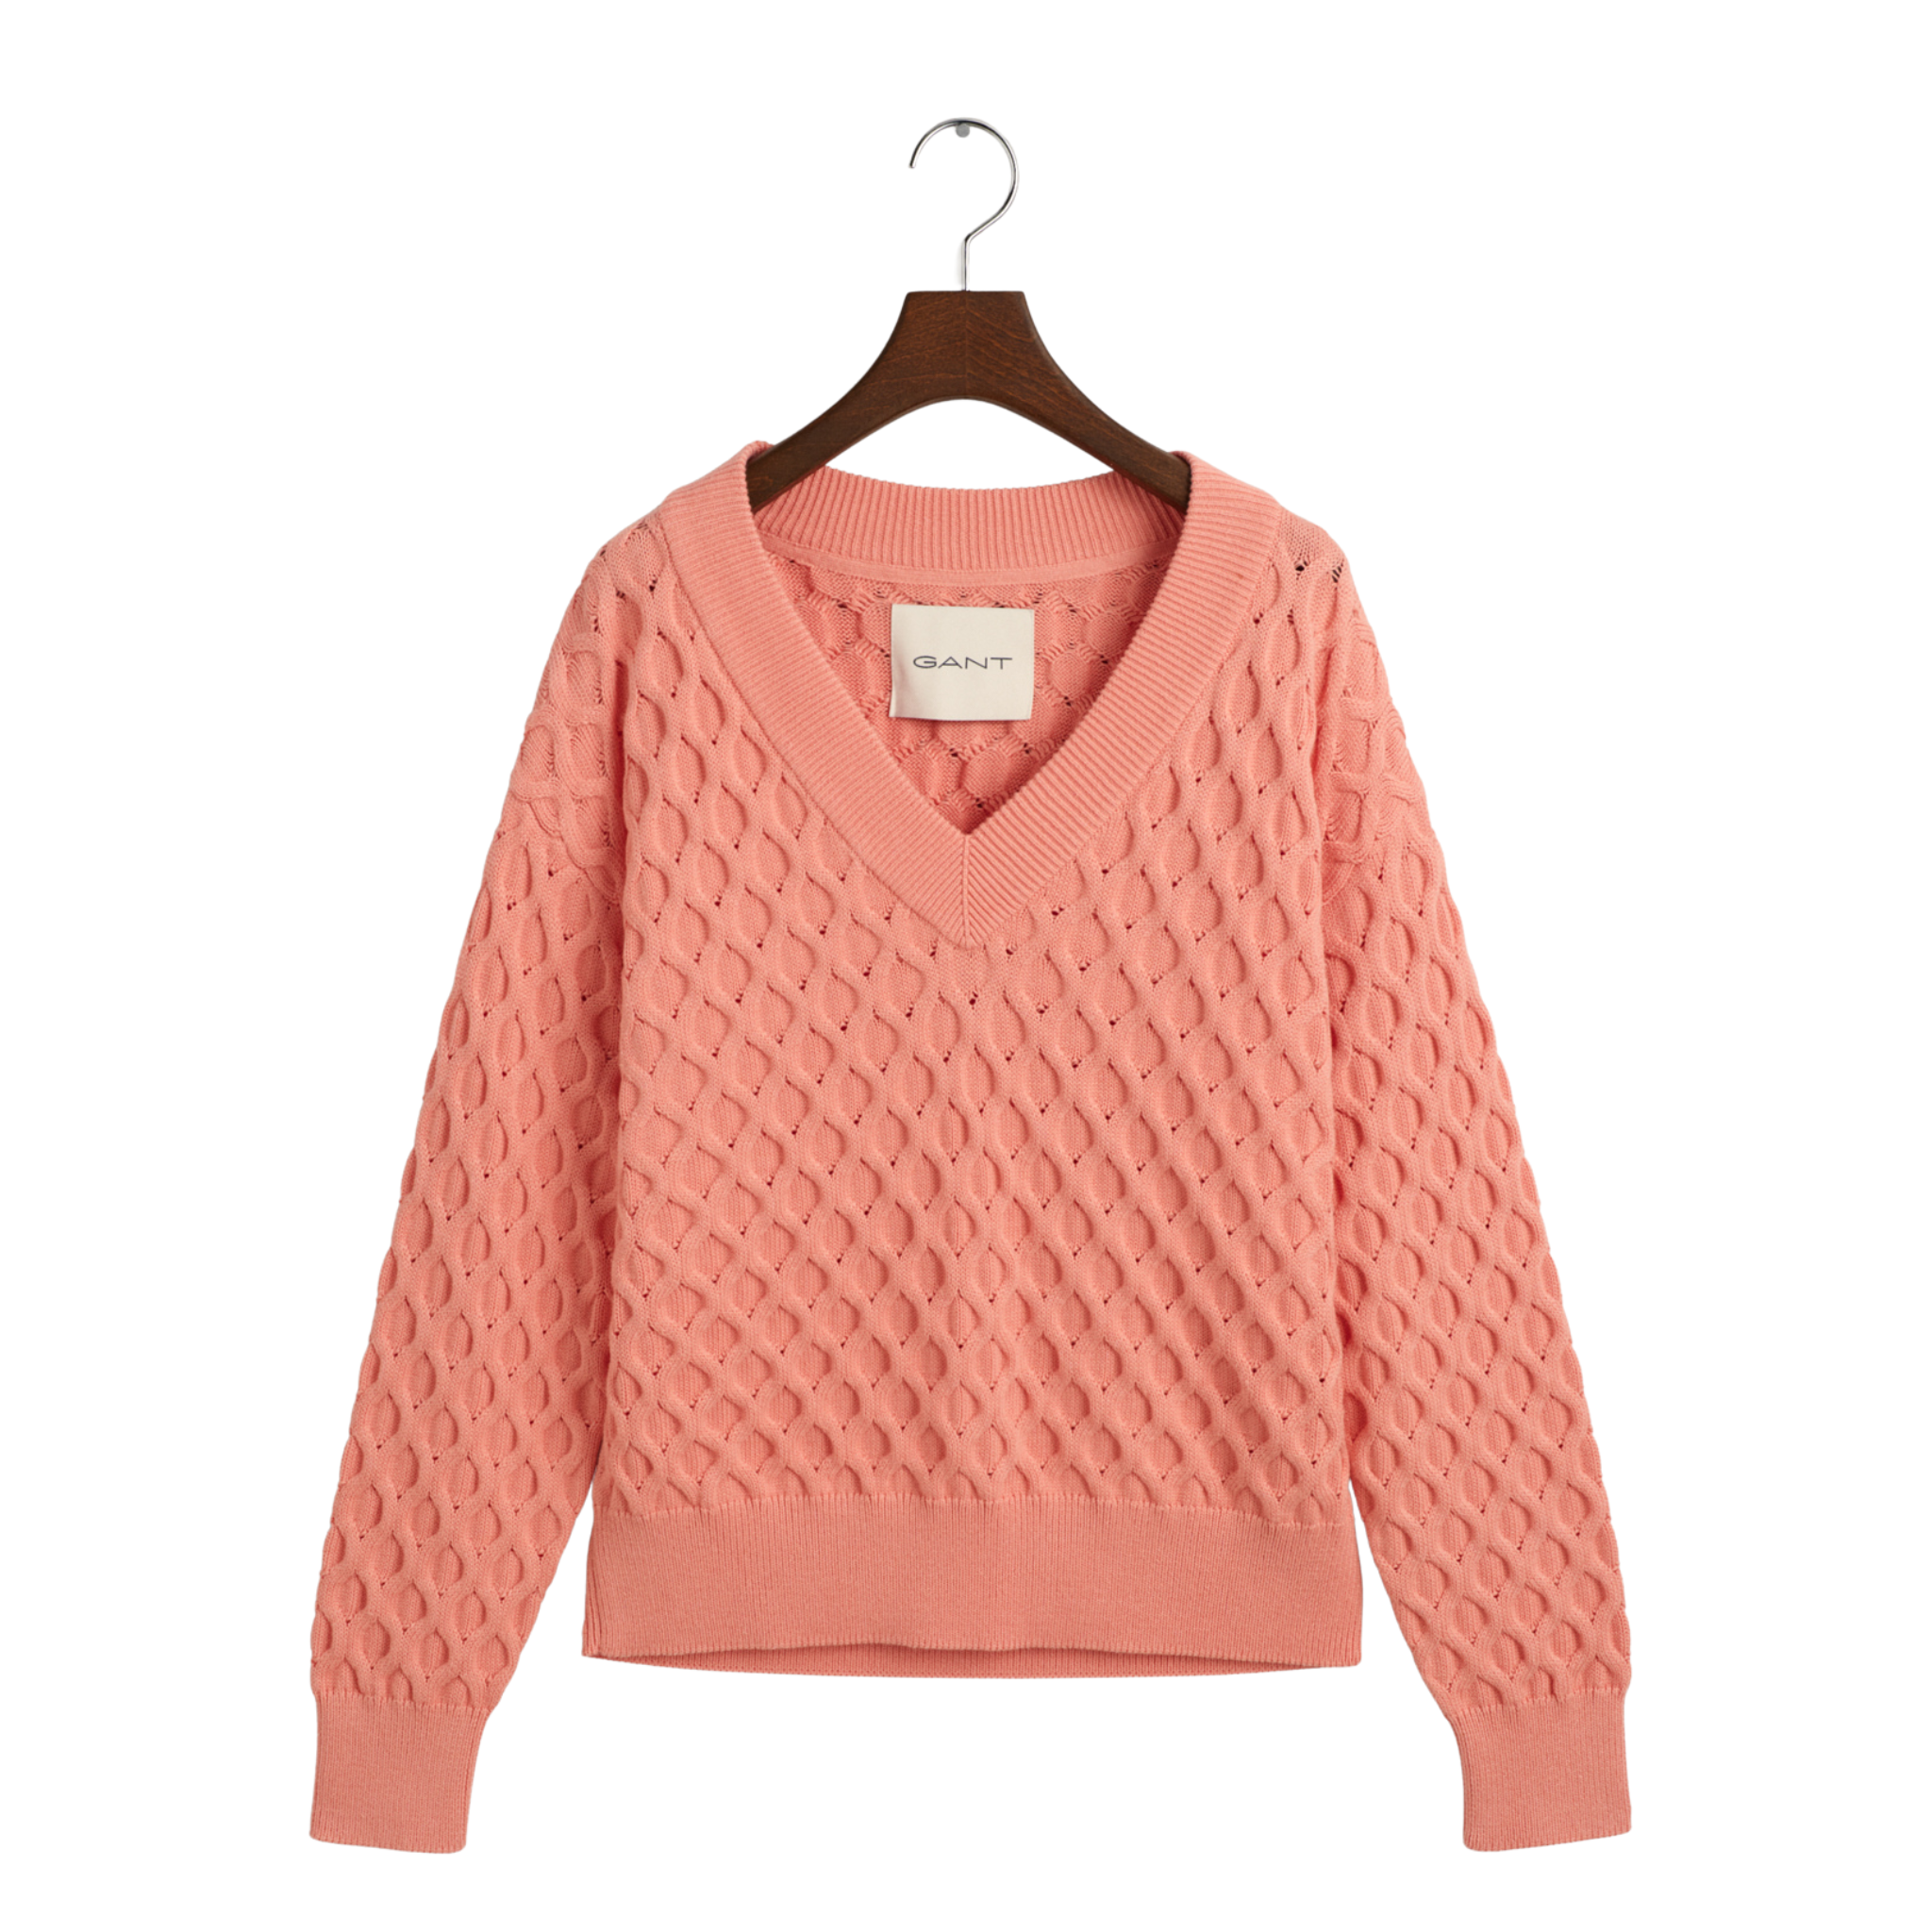 Textured Knit V-Neck Peachy Pink